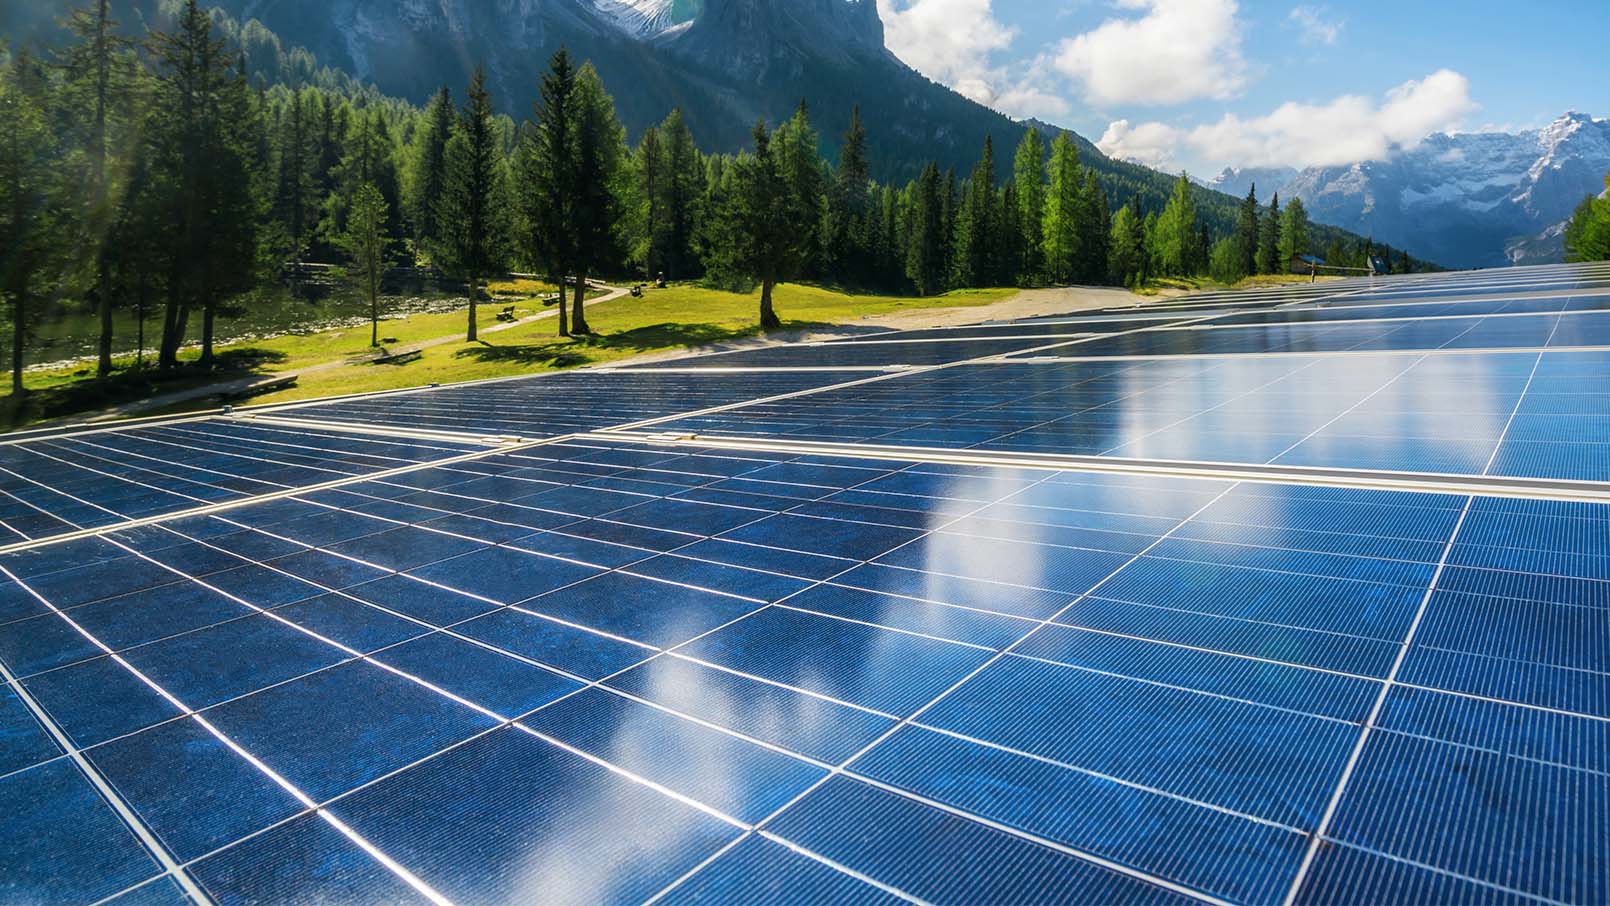 solar panels in a picturesque scene with mountains in the background